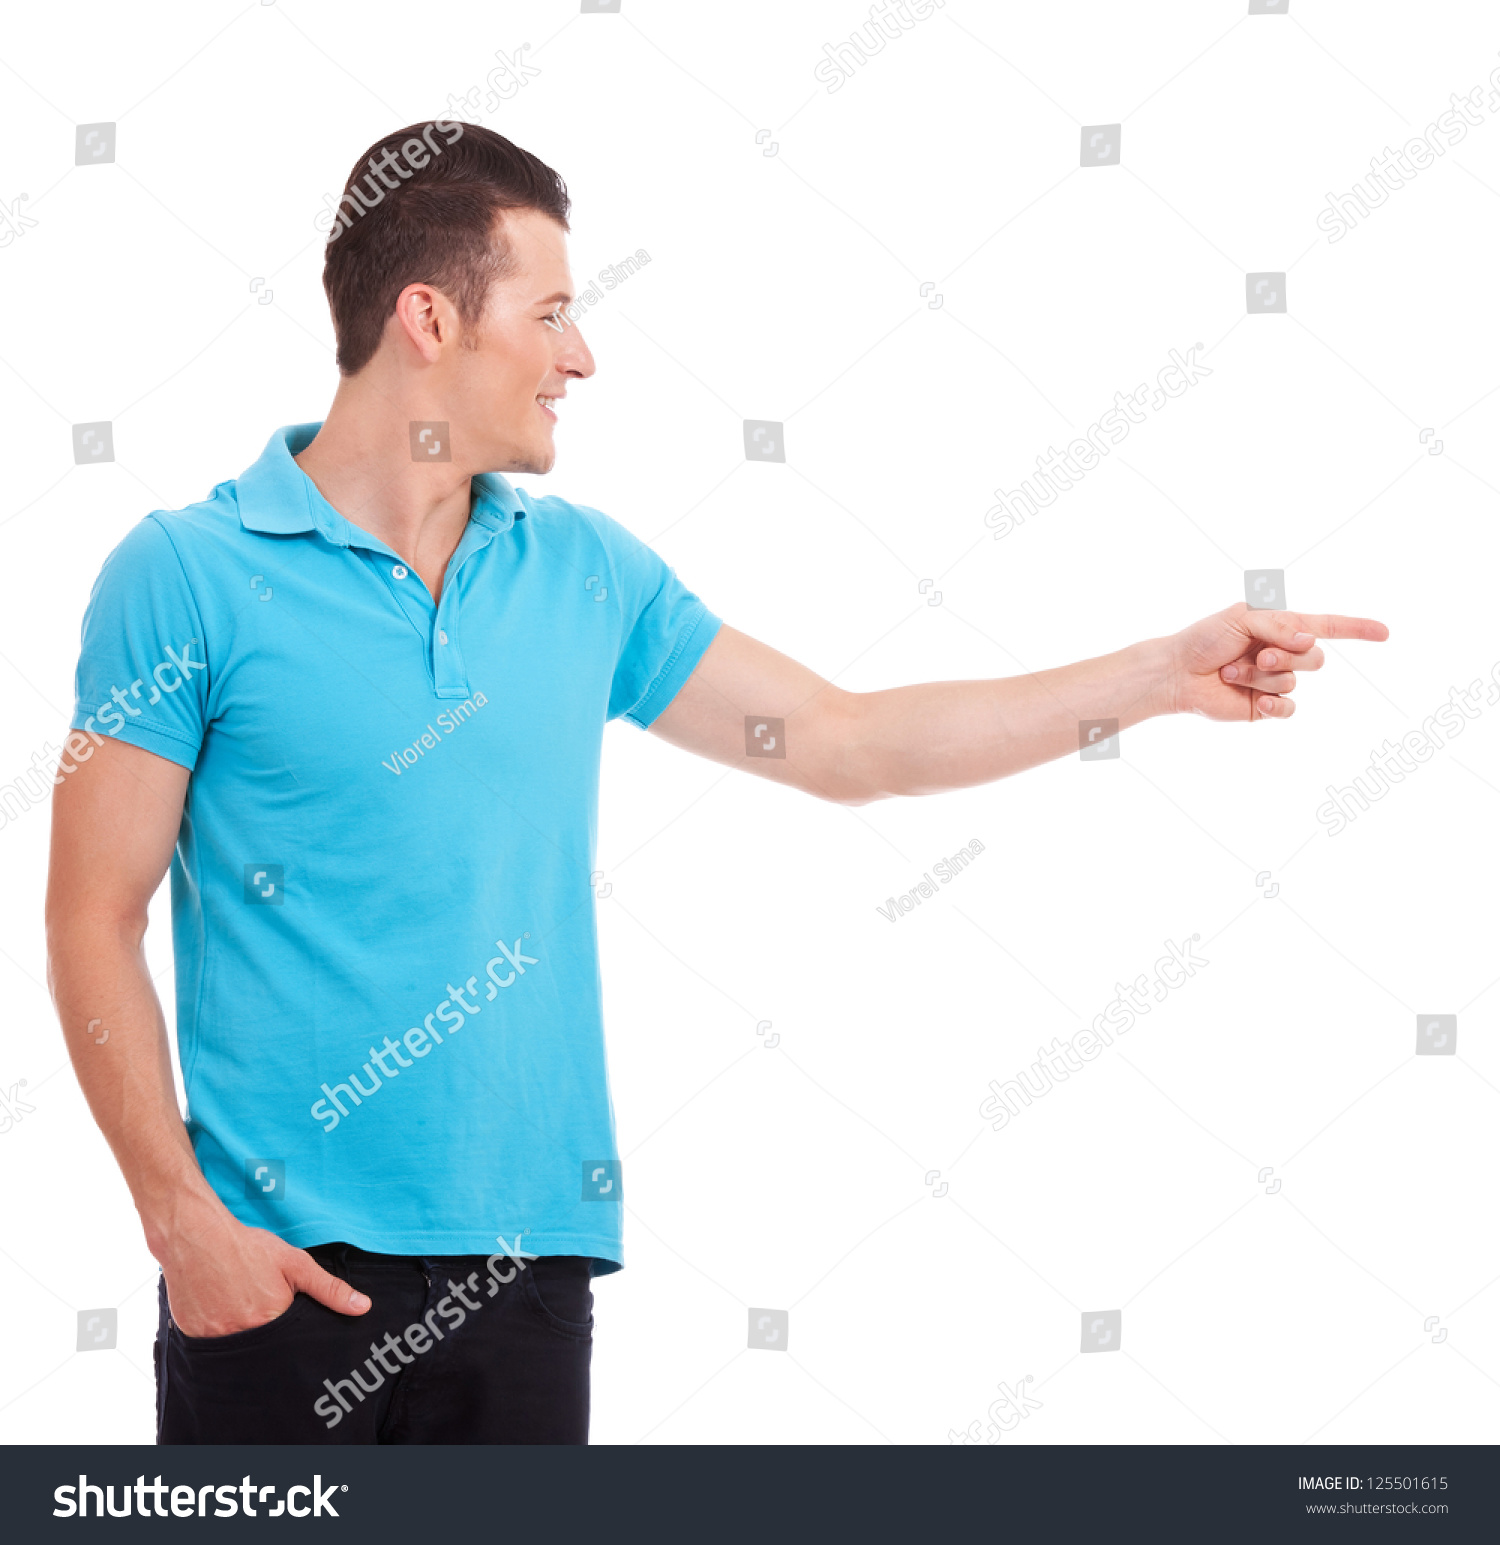 Casual young man pointing and looking to his side, with the other hand in his pocket, over white background #125501615